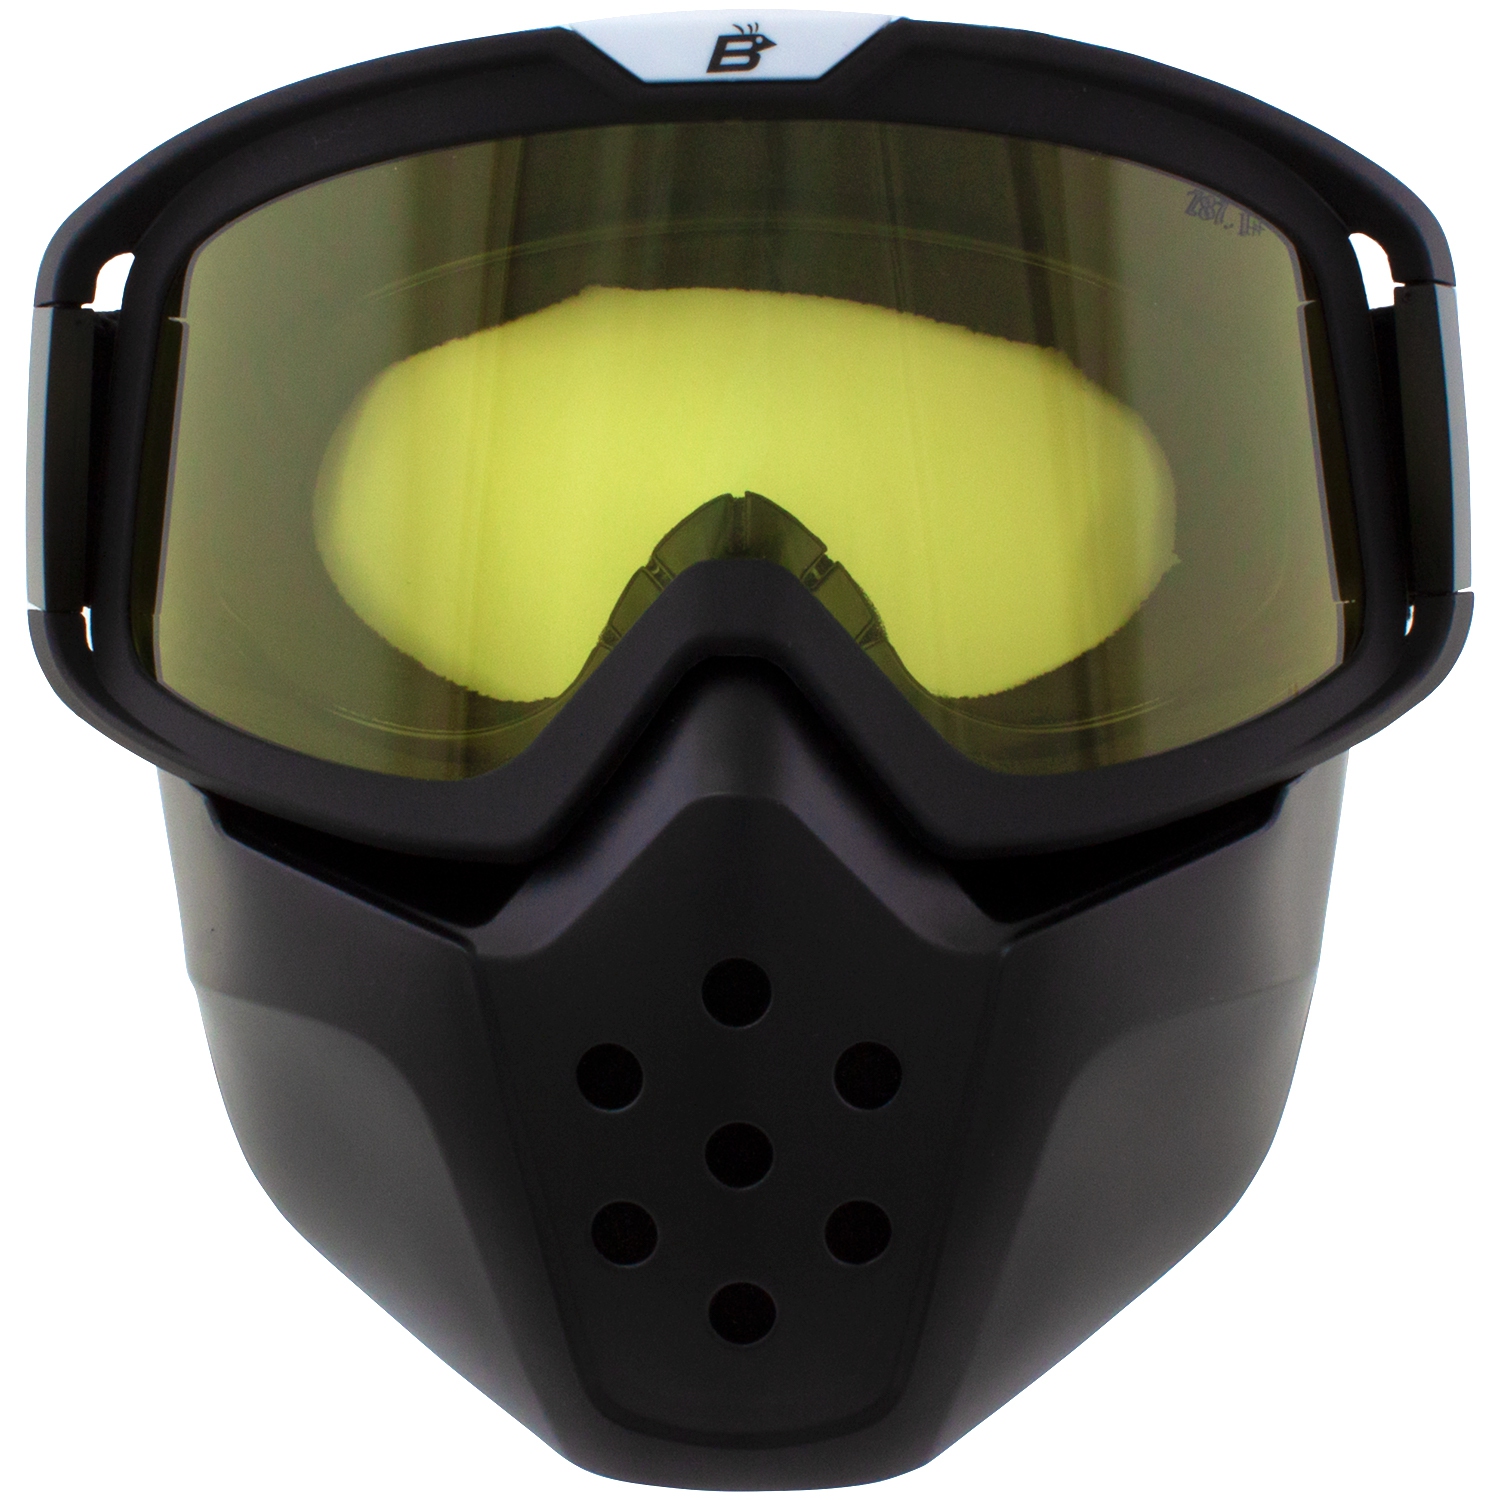 Birdz Pelican Black Fitover Padded Atv Motorcycle Goggle With Face